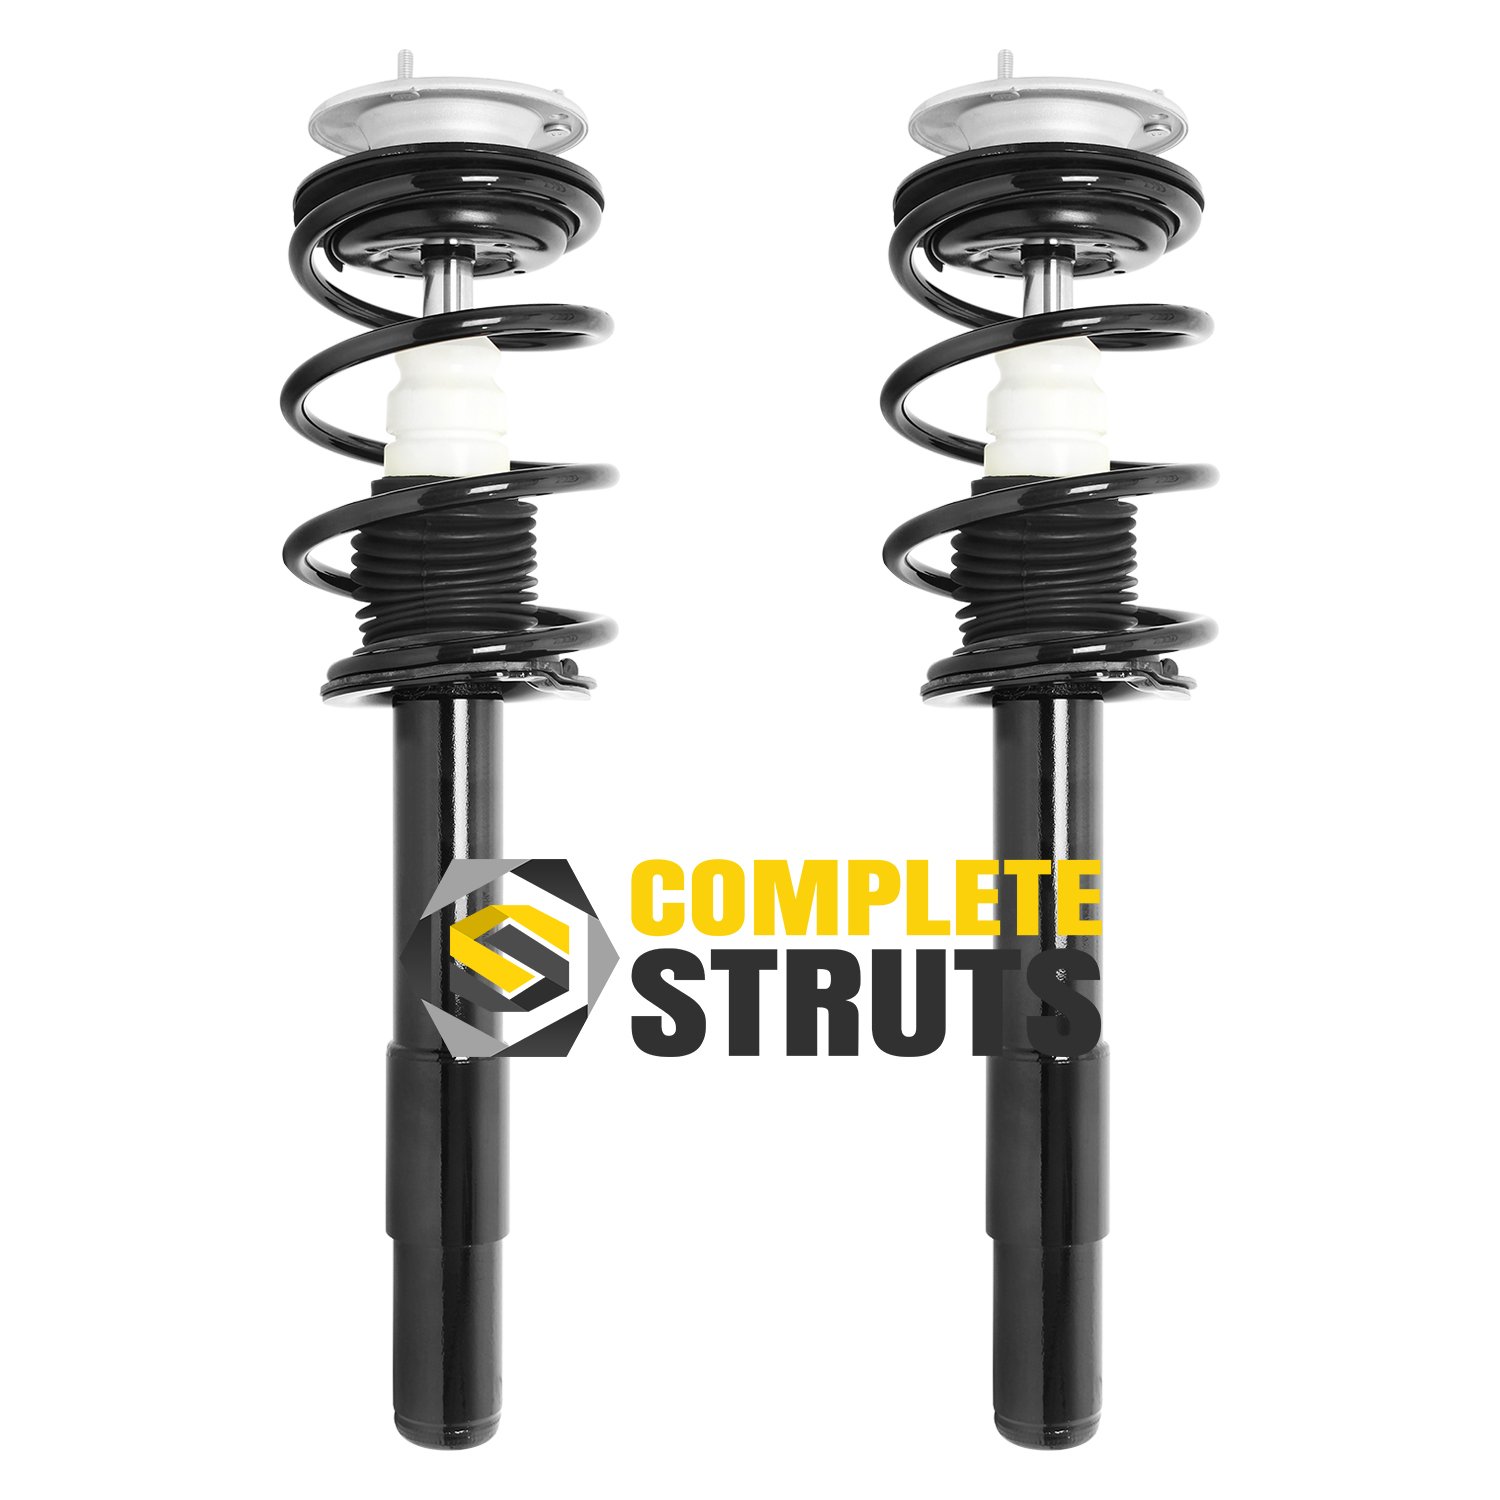 COMPLETESTRUTS Front Quick Complete Strut Assemblies with Coil Springs Replacement for 2004-2007 BMW 530i E60 - Set of 2